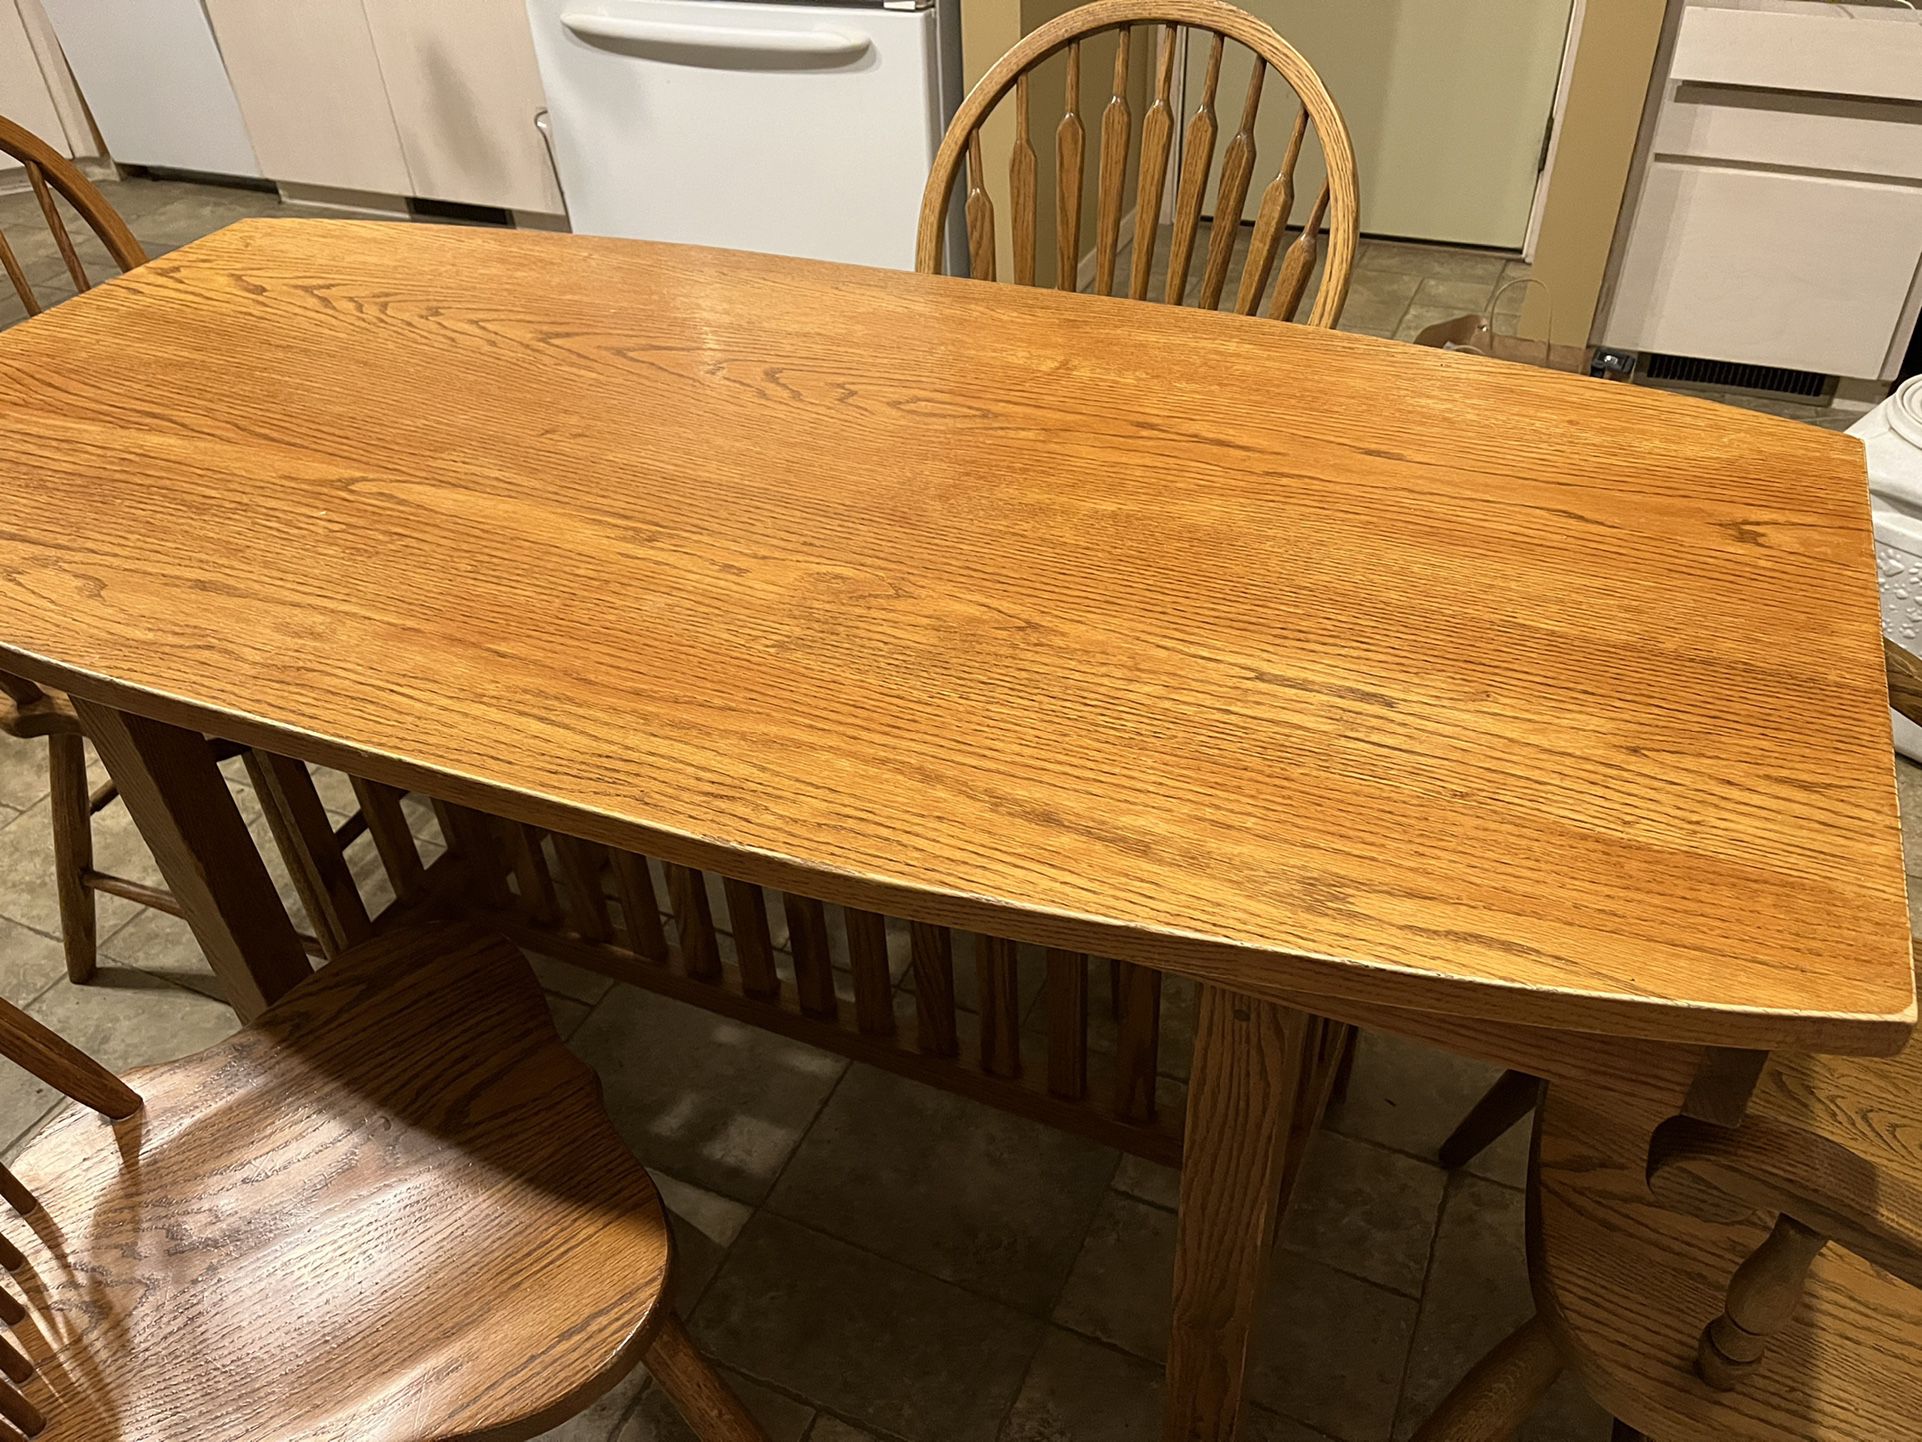 Solid Wood Kitchen/dining Table With 4 Chairs  of Cherry Finish 